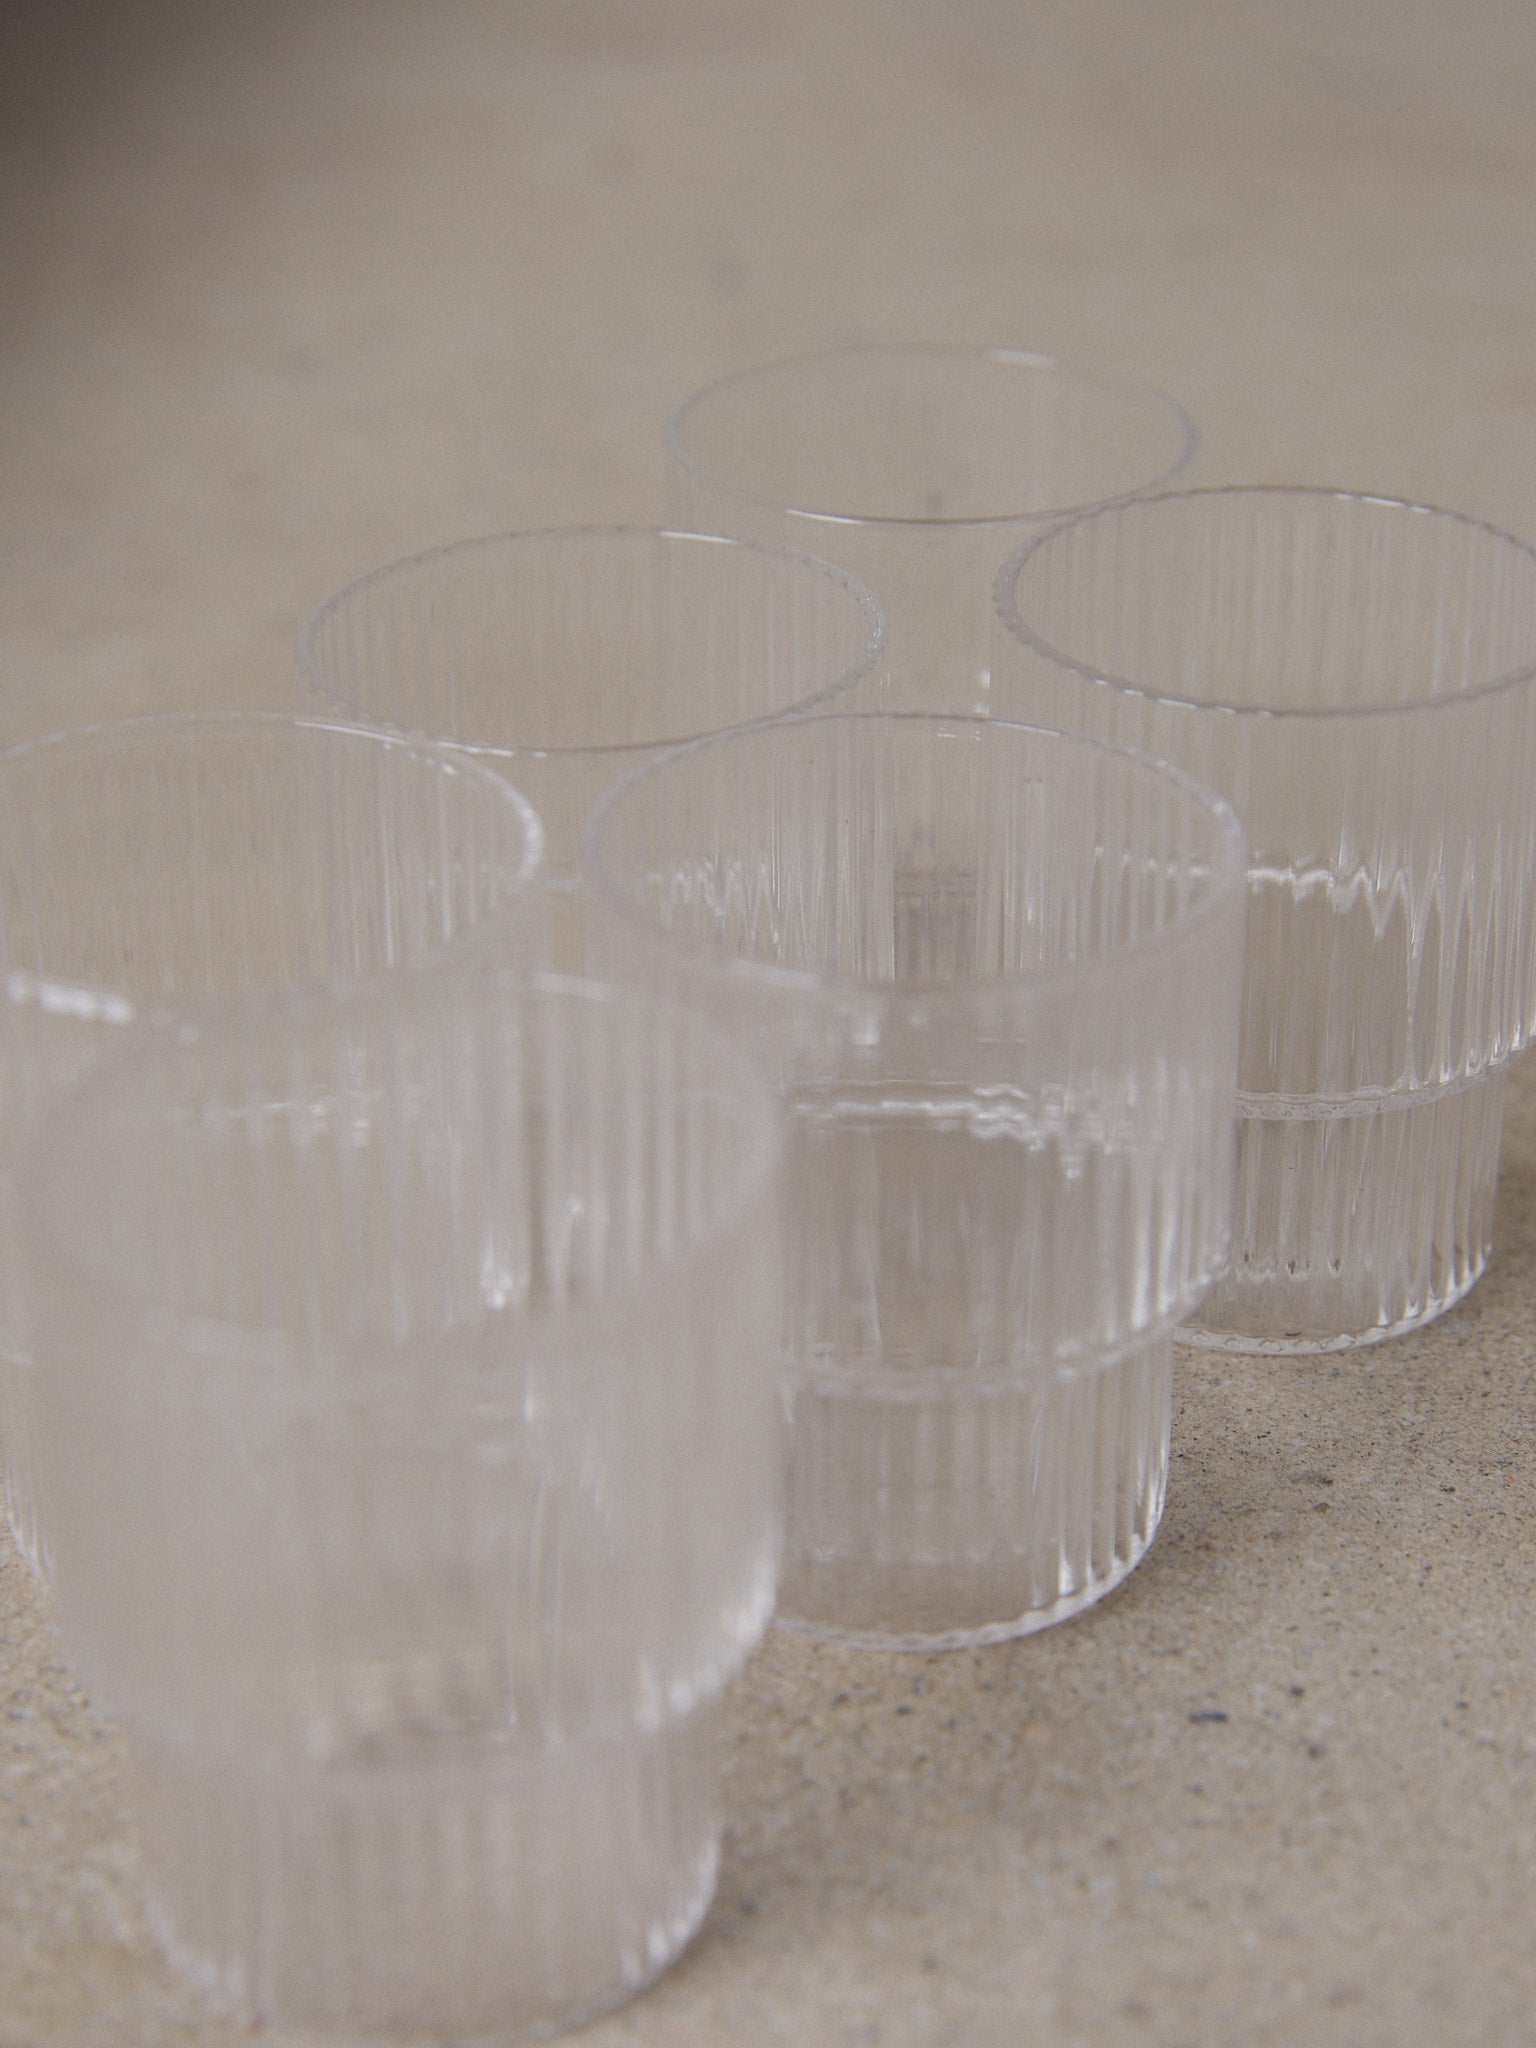 Ridge Shot Glass Set/6. A set of six unique shot glasses with geometric forms and a sophisticated vertical ridge surface in clear transparent glass